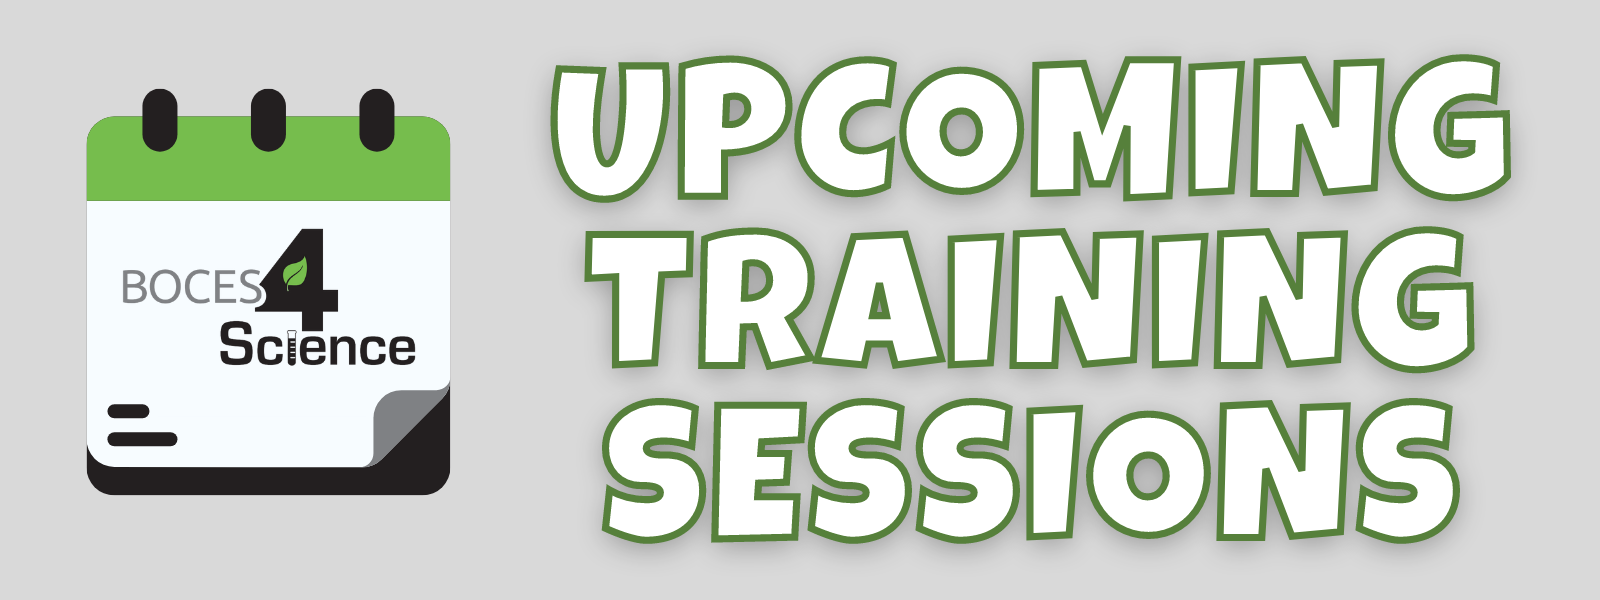 upcoming training sessions graphic